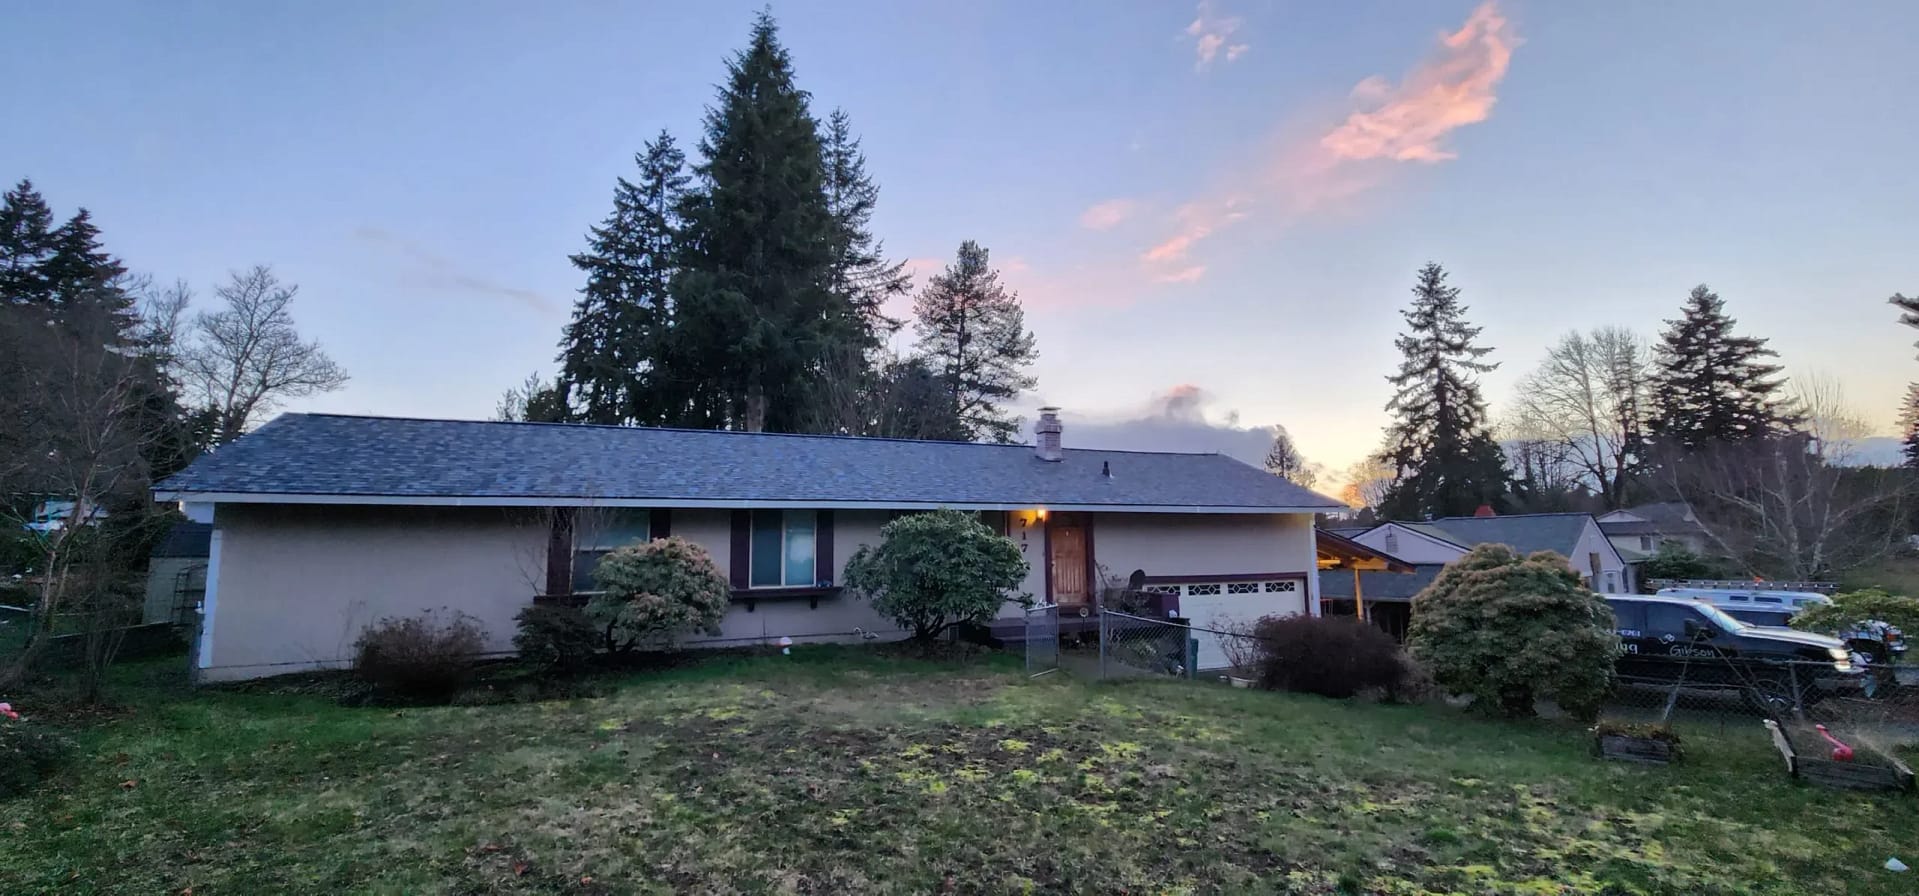 new asphalt shingle roof on a home in washington during sunset